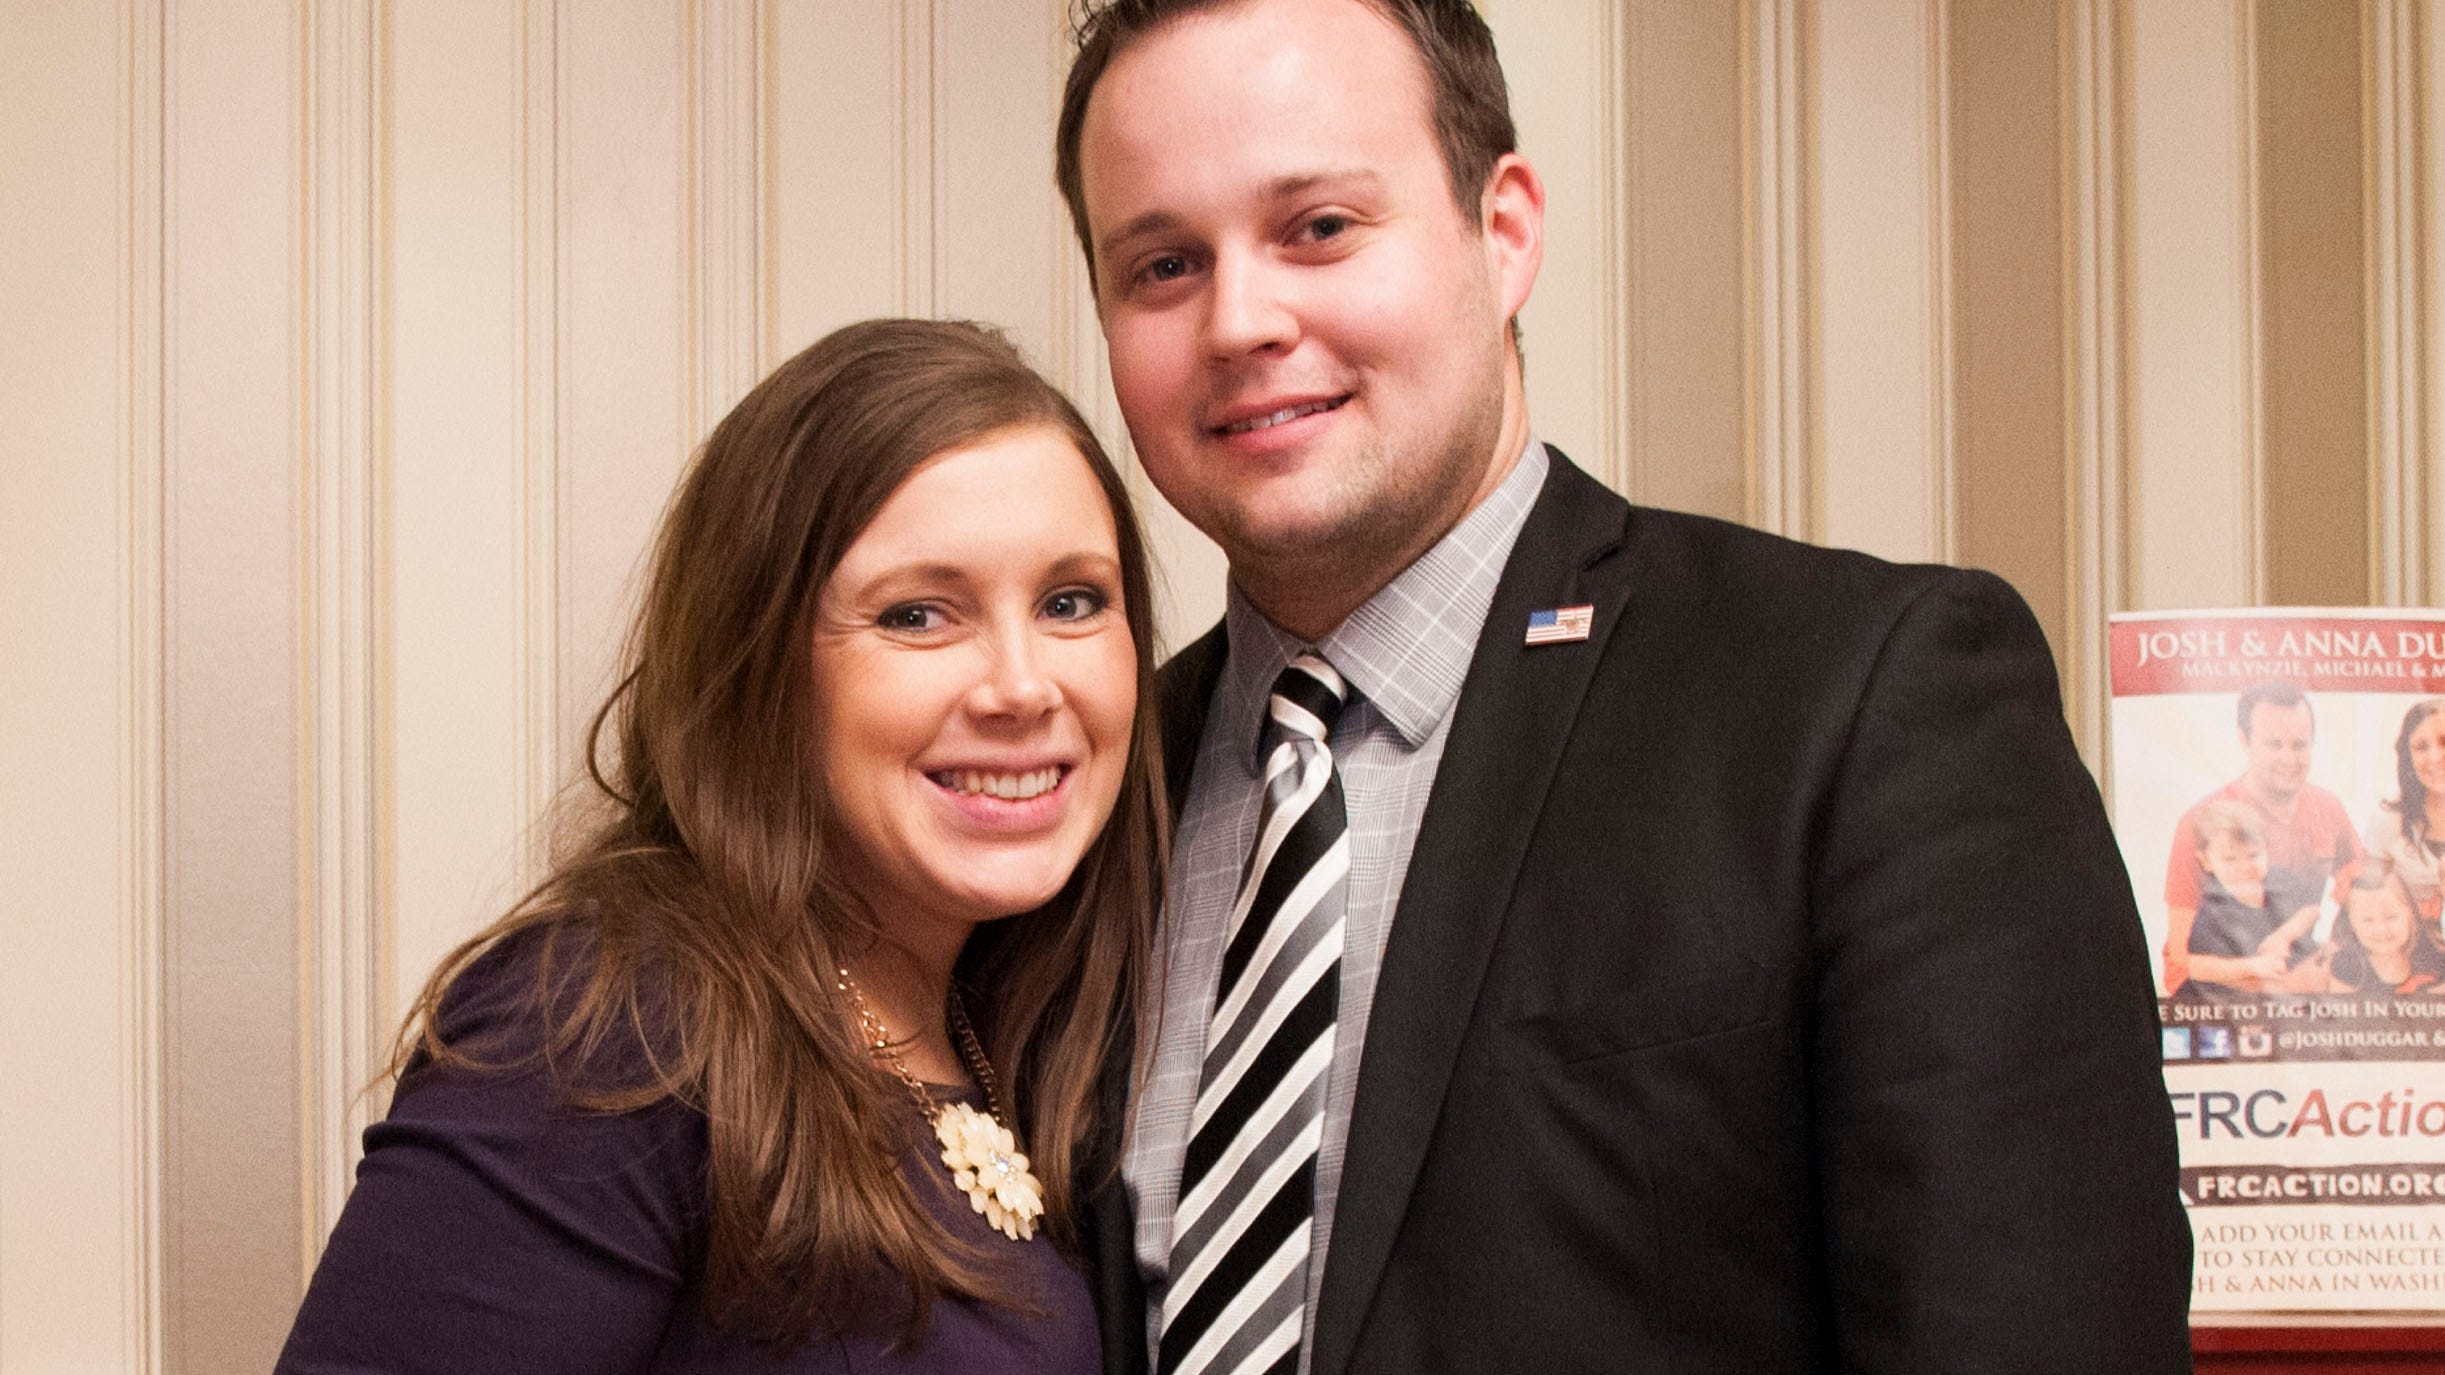 Josh Duggar’s wife Anna defended reality star as a ‘diligent worker’ in days leading up to his federal arrest